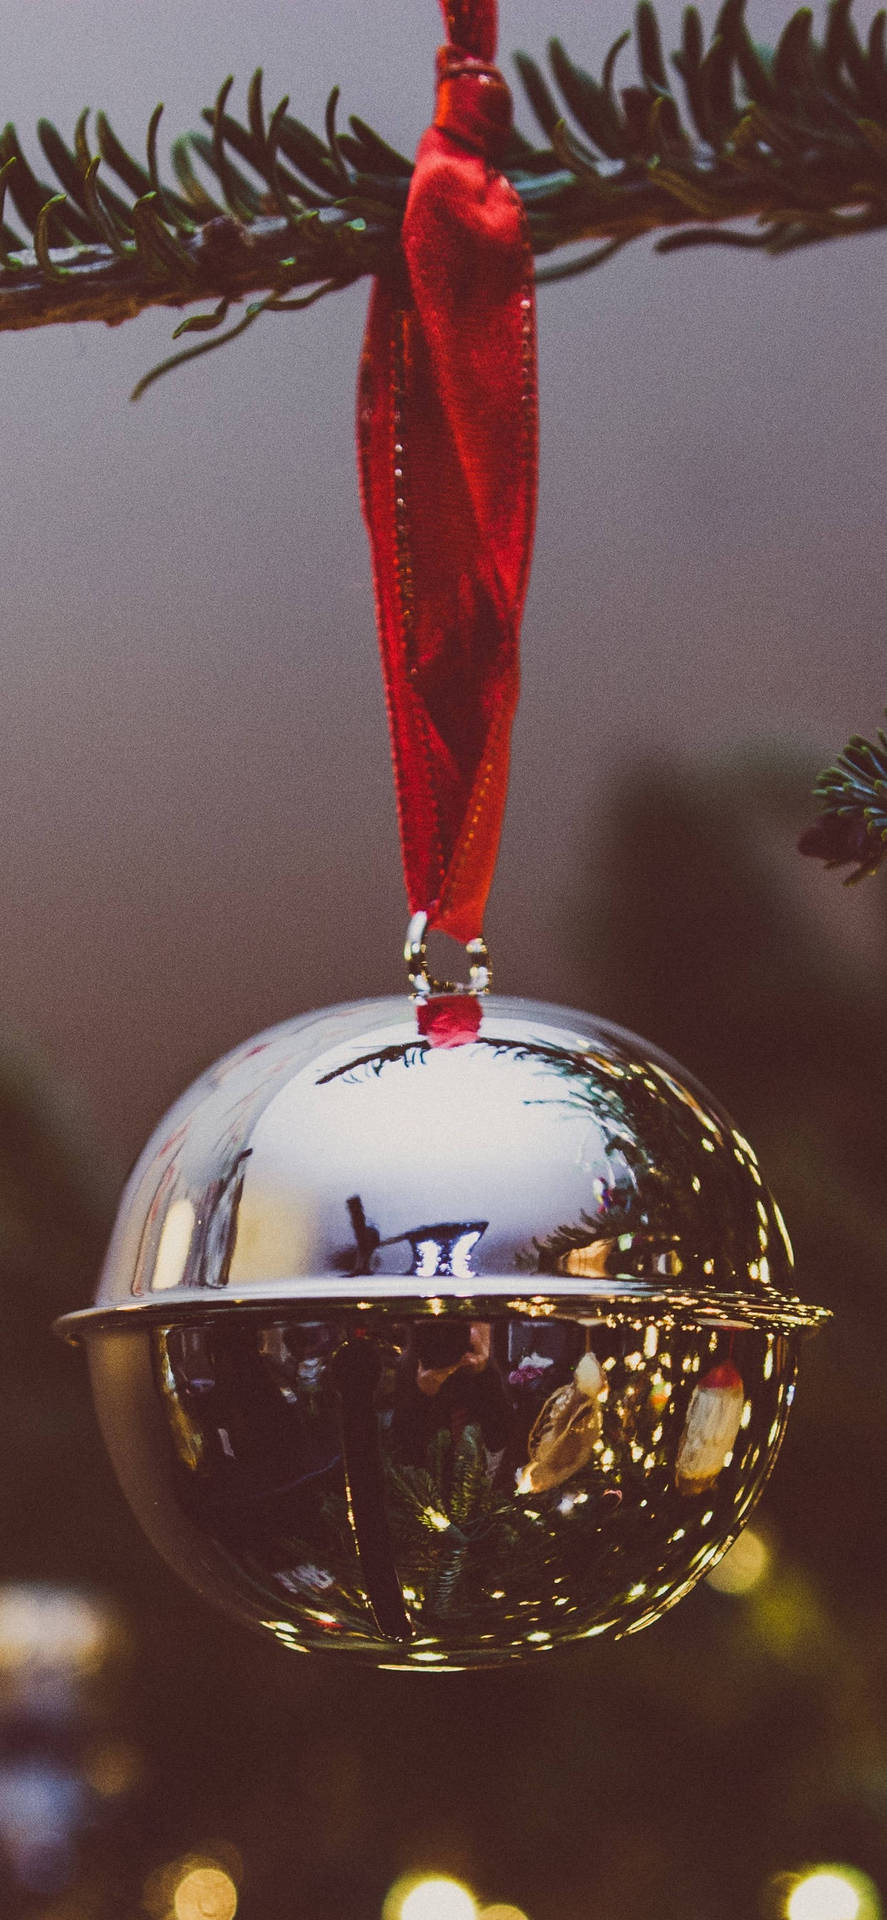 Aesthetic Christmas Silver Ball Iphone Wallpaper